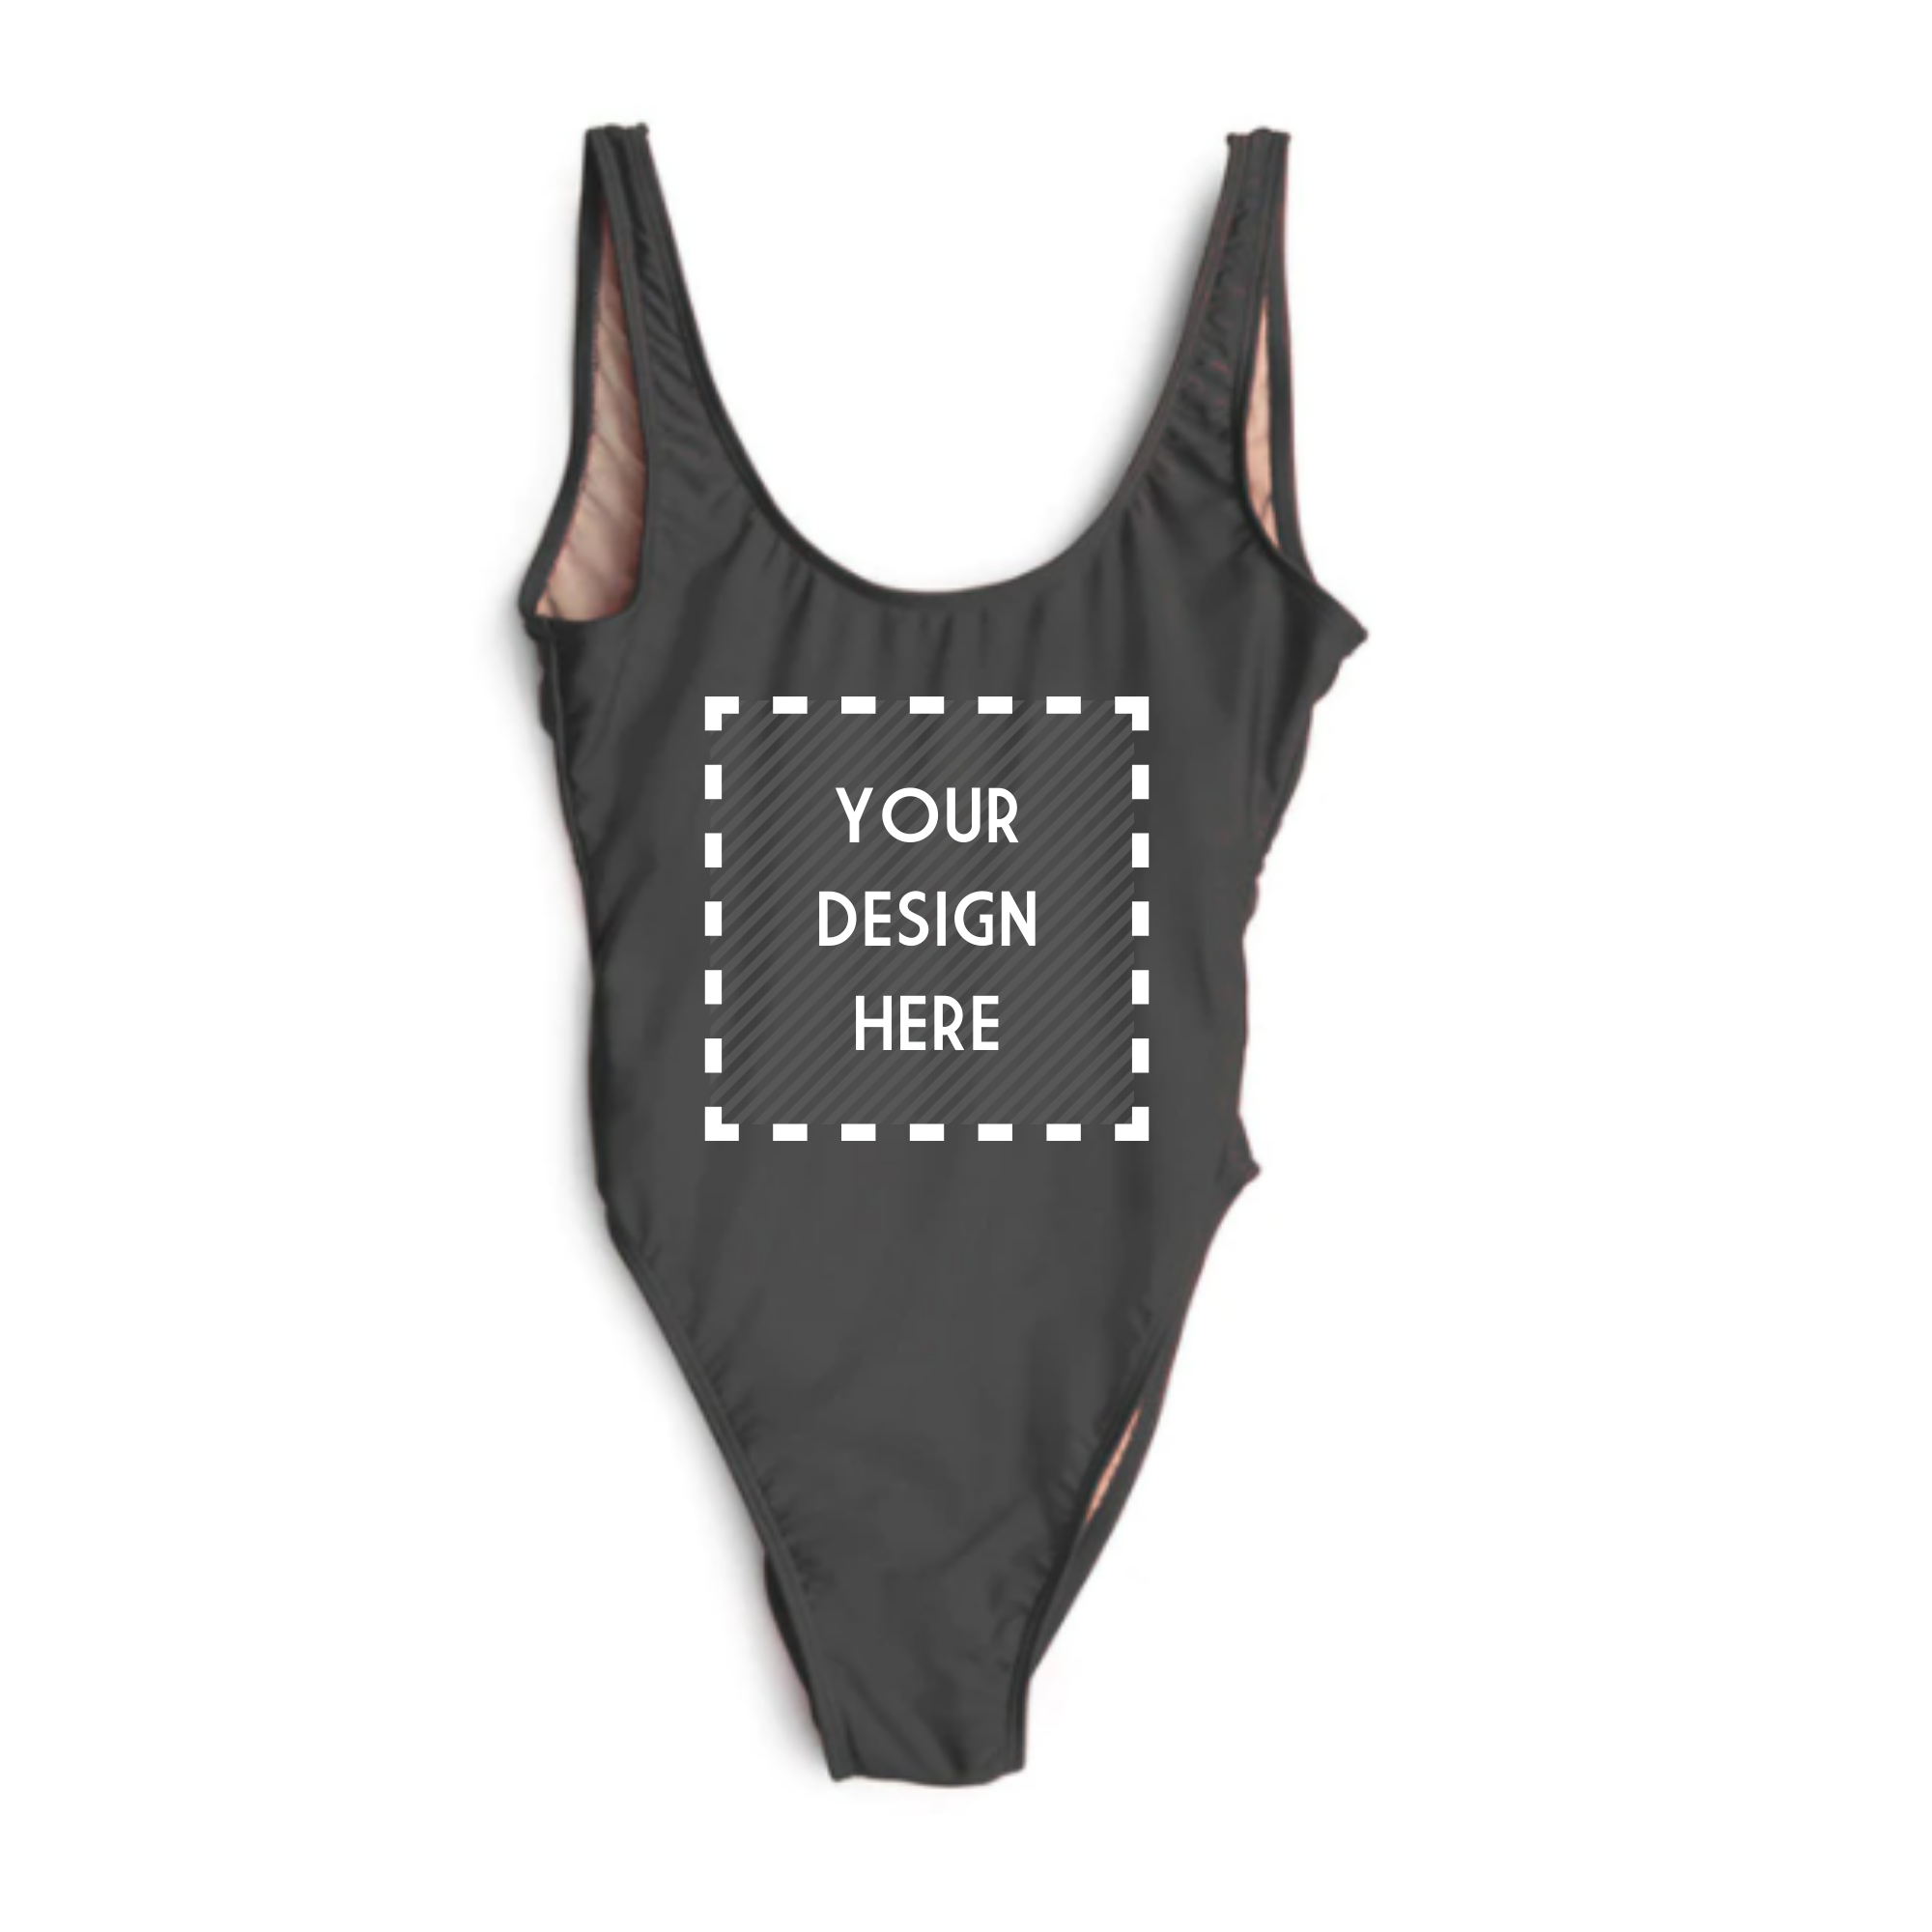 A black swimsuit with a customizable area on the front